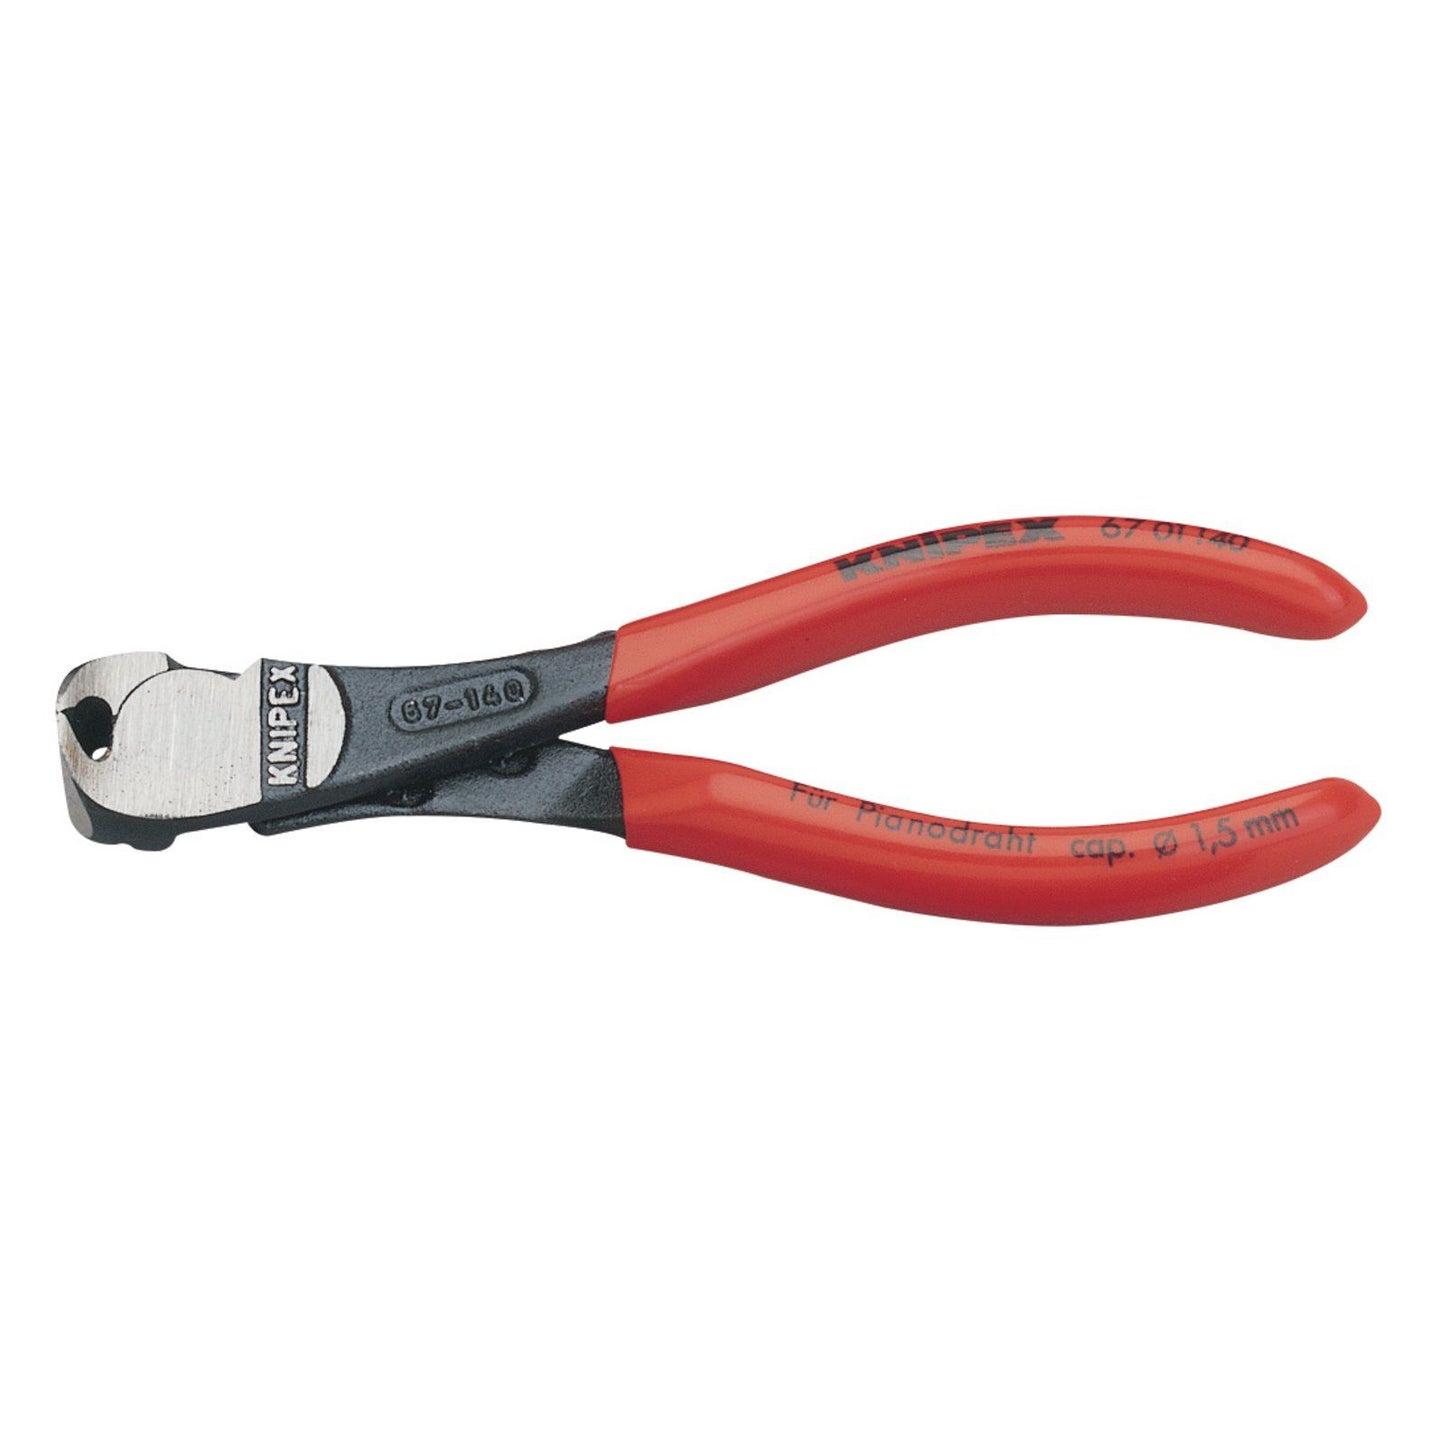 Knipex Knipex 67 01 140 140mm High Leverage End Cutting Nippers - 18428